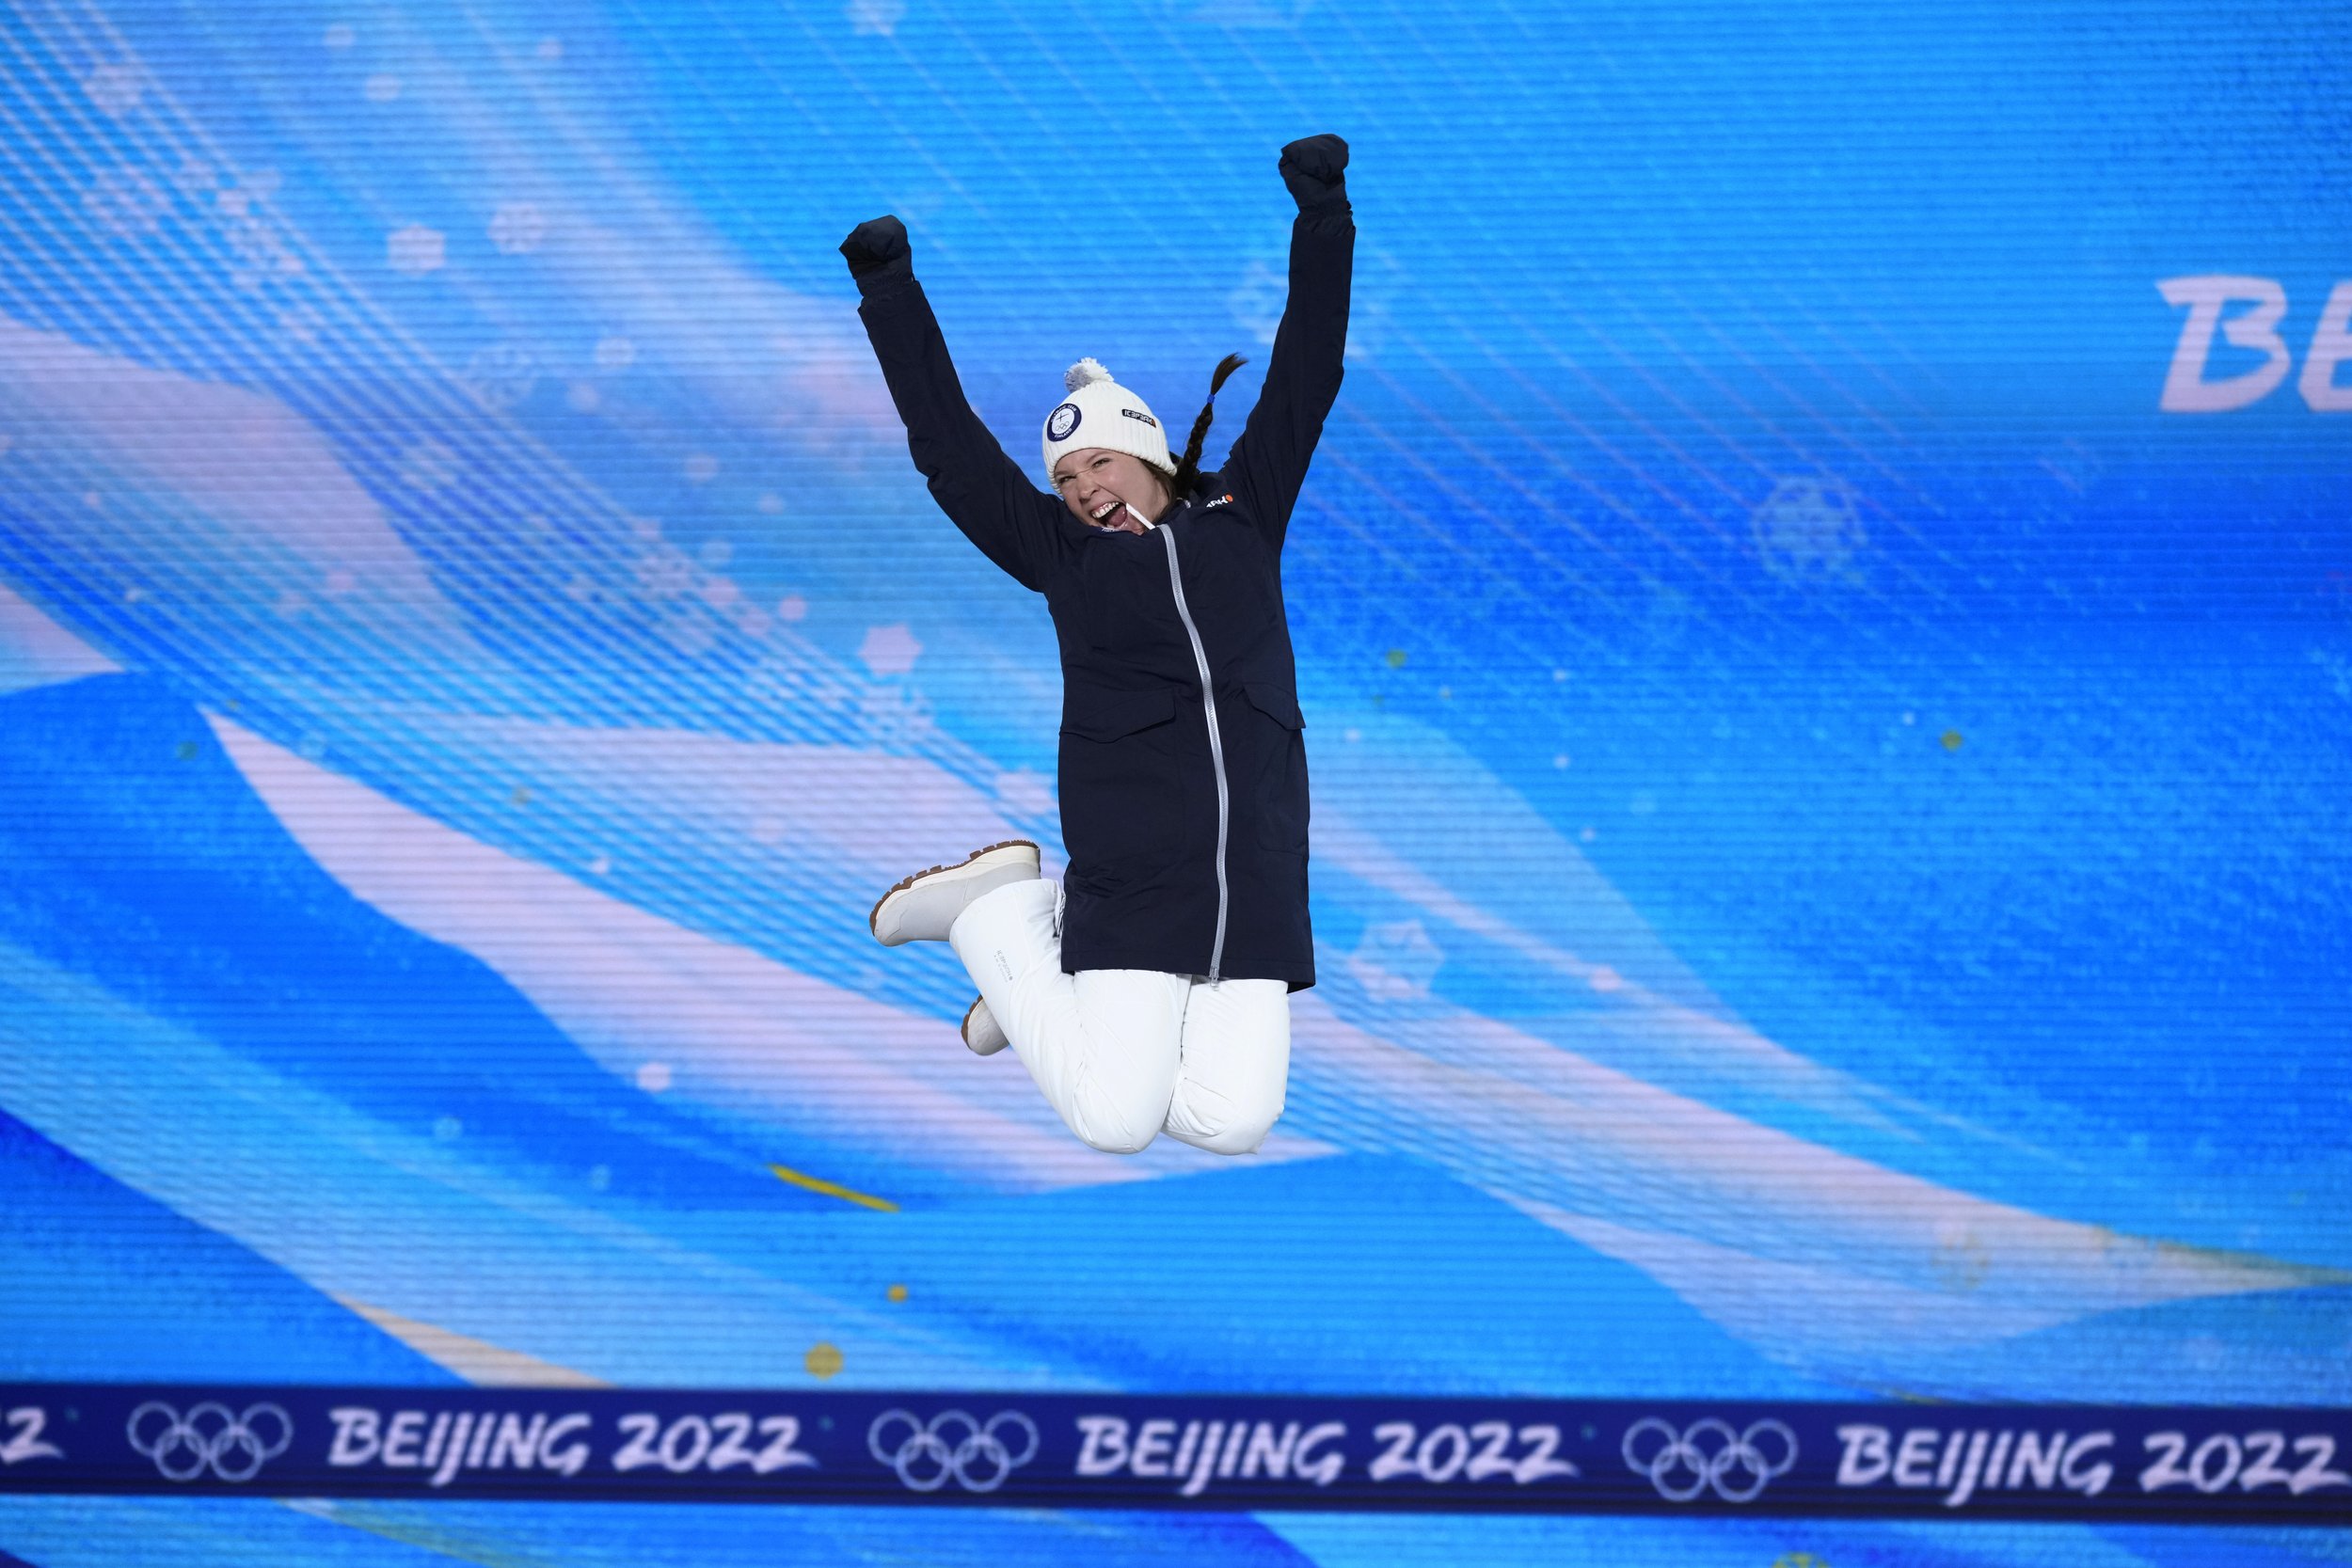  Kerttu Niskanen of Finland jumps during introductions during a medal ceremony for the women's cross-country 10-kilometer event at the 2022 Winter Olympics, Thursday, Feb. 10, 2022, in Zhangjiakou, China. (AP Photo/Kirsty Wigglesworth) 